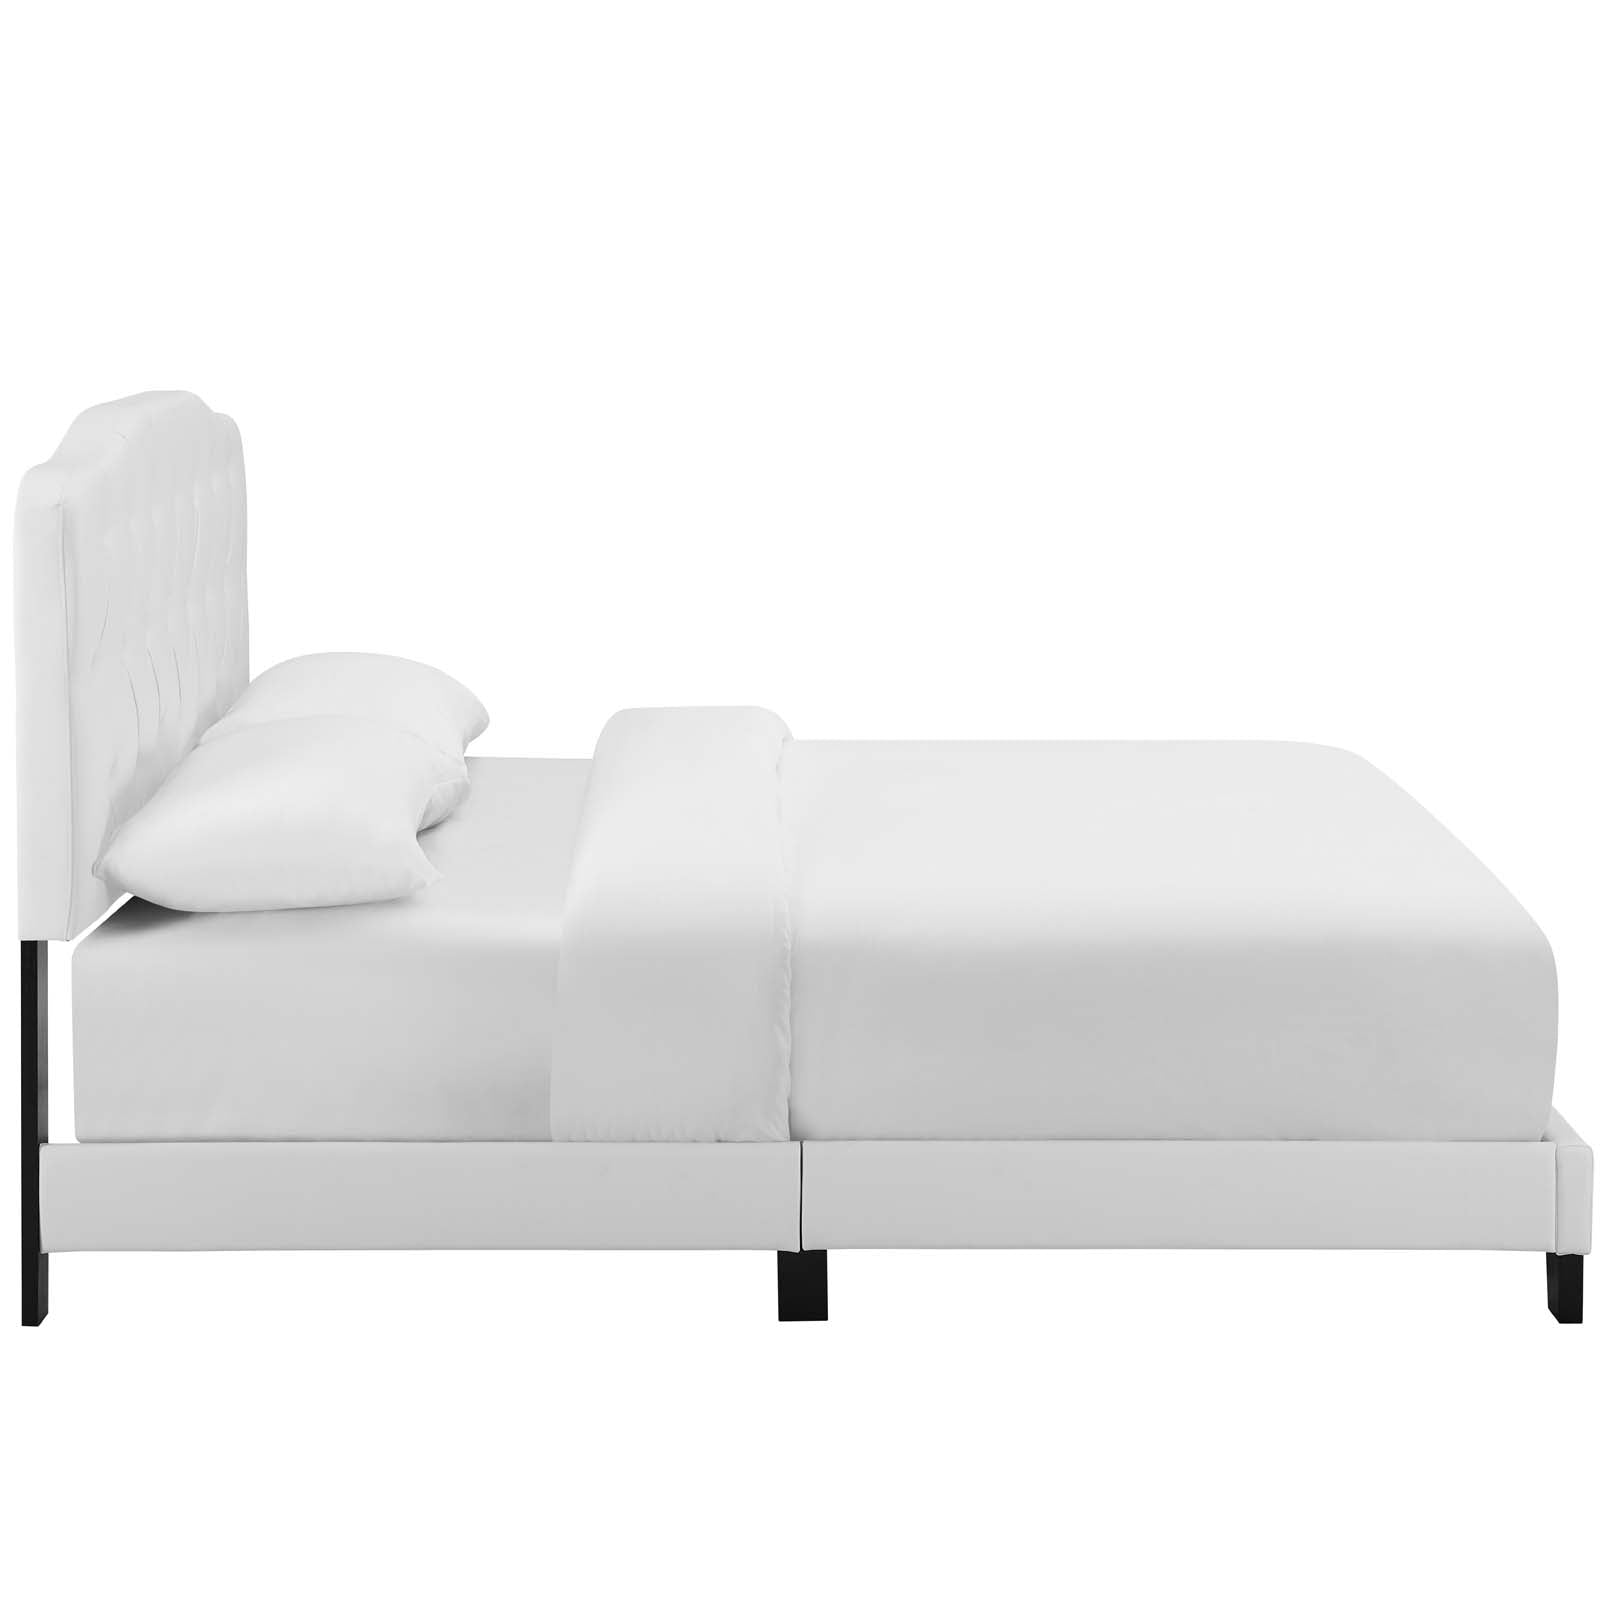 Modway Beds - Amelia Full Faux Leather Bed White